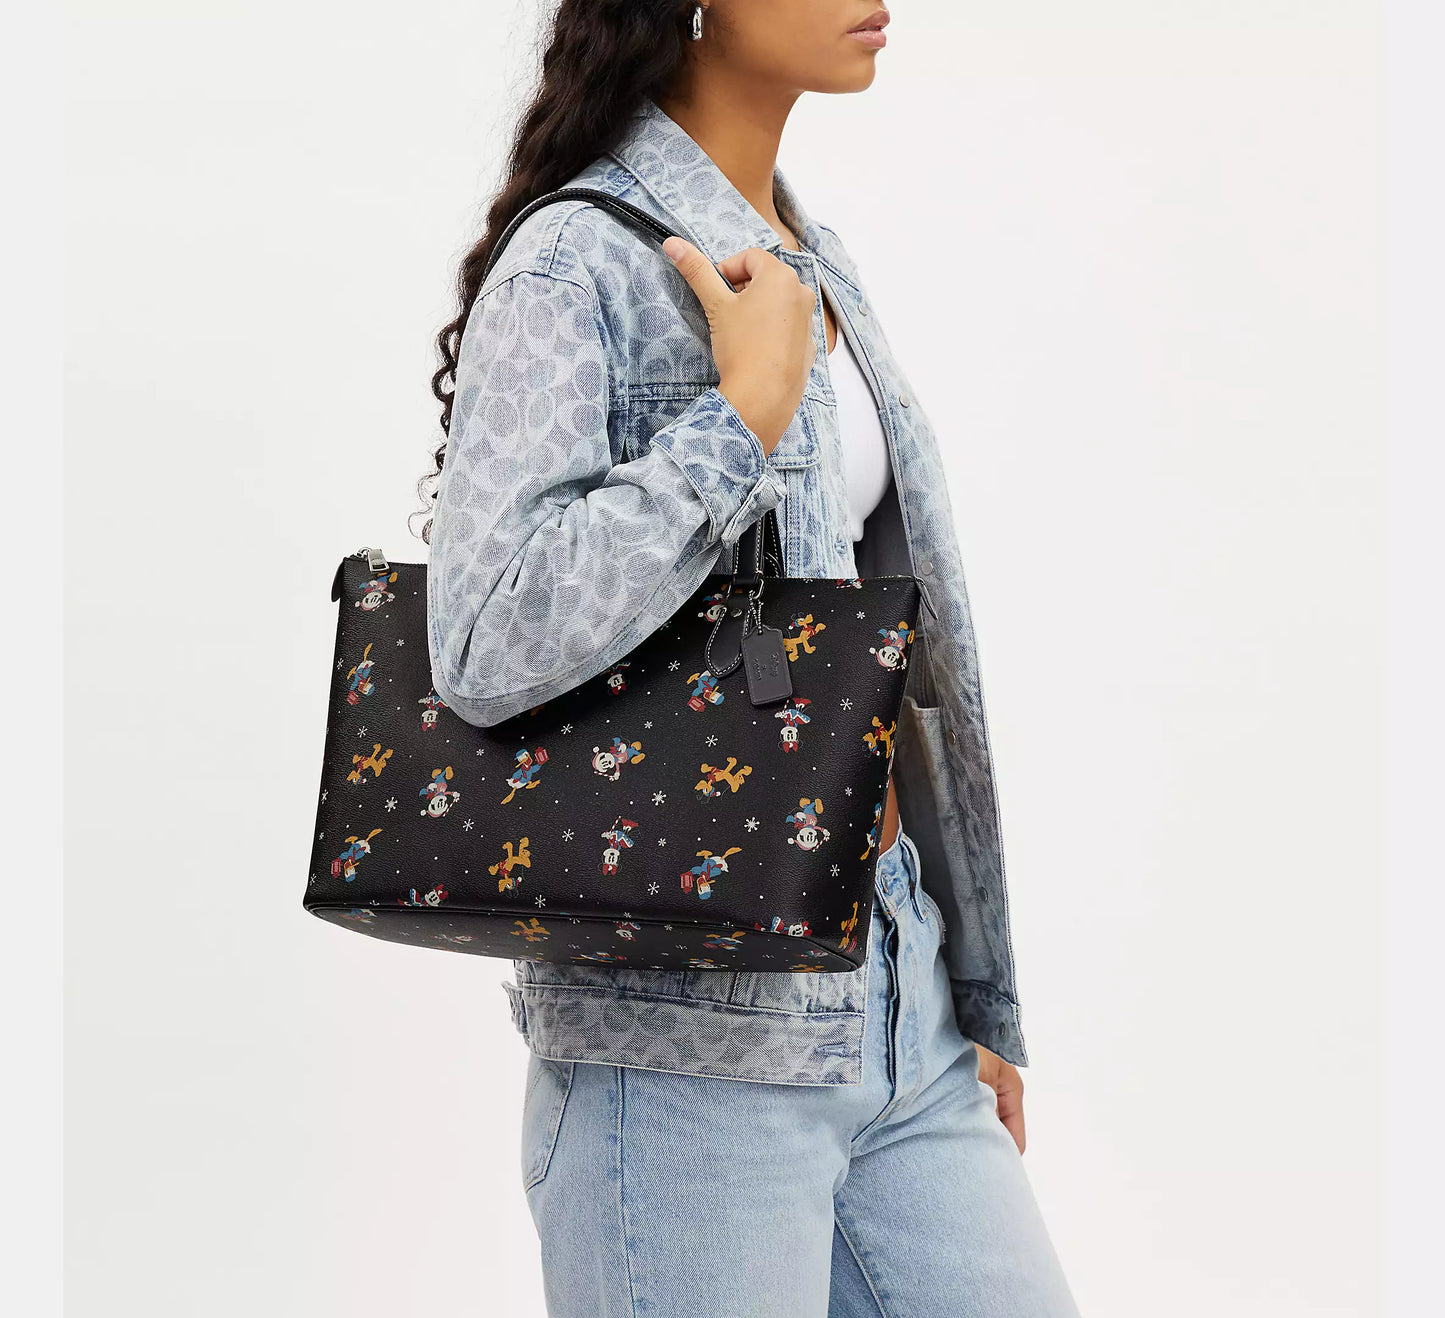 Disney X Coach Gallery Tote With Holiday Print